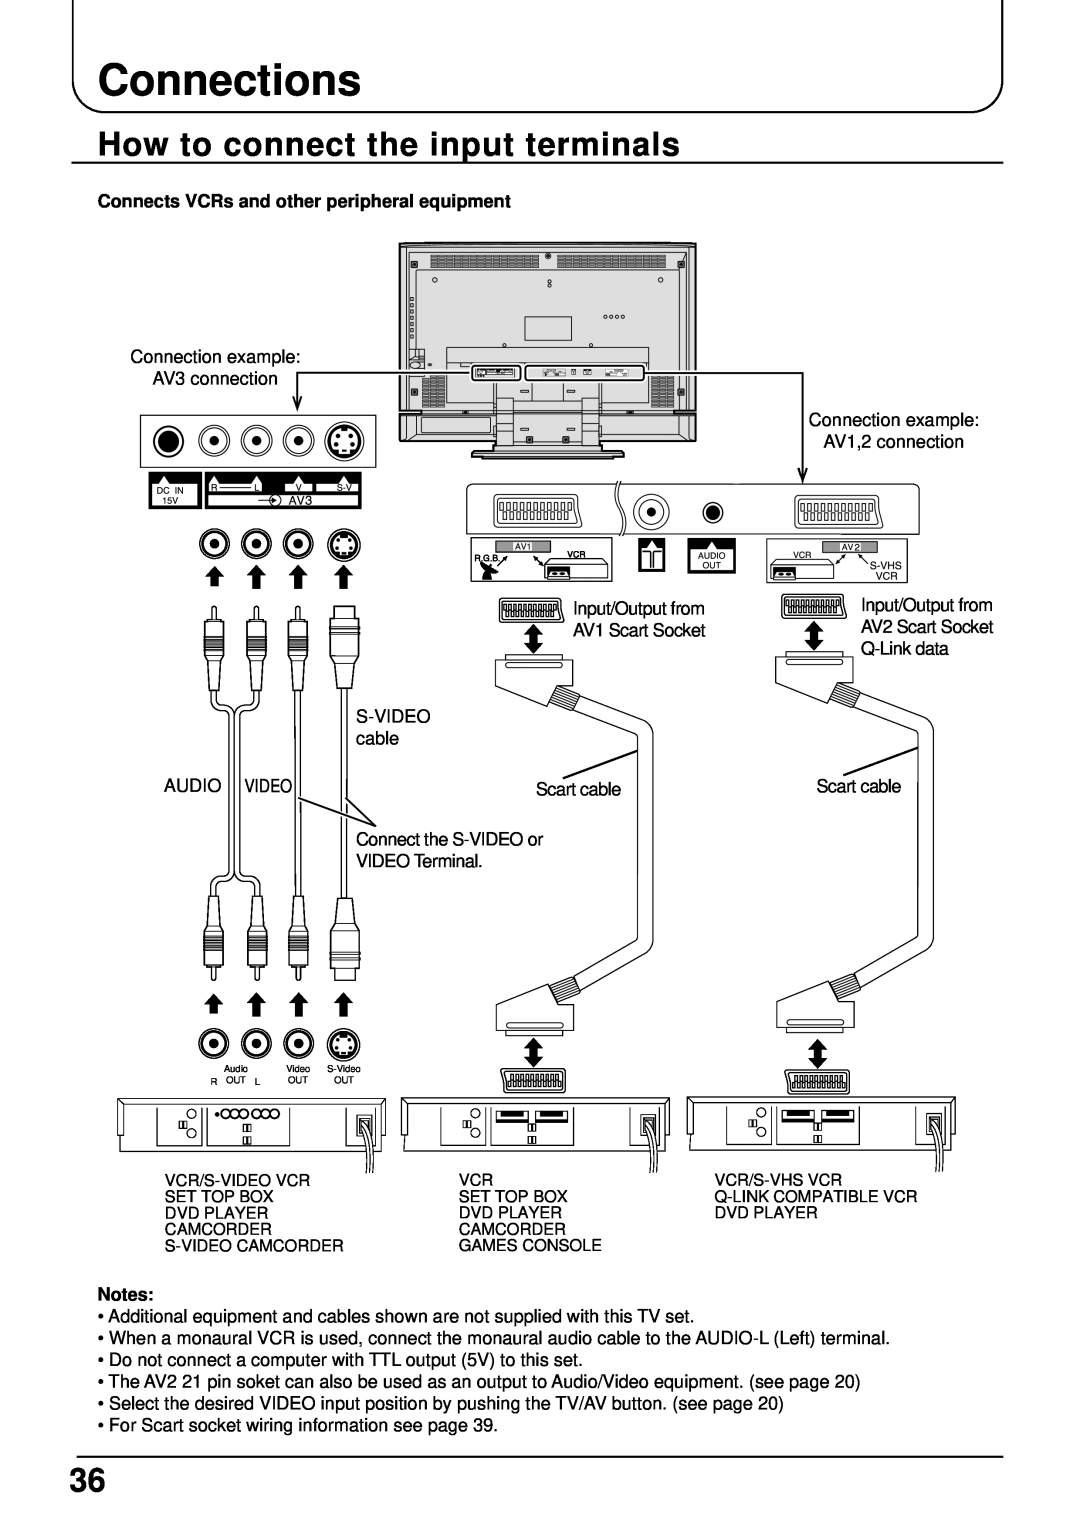 Panasonic TX-22LT2 manual Connections, How to connect the input terminals, Connects VCRs and other peripheral equipment 